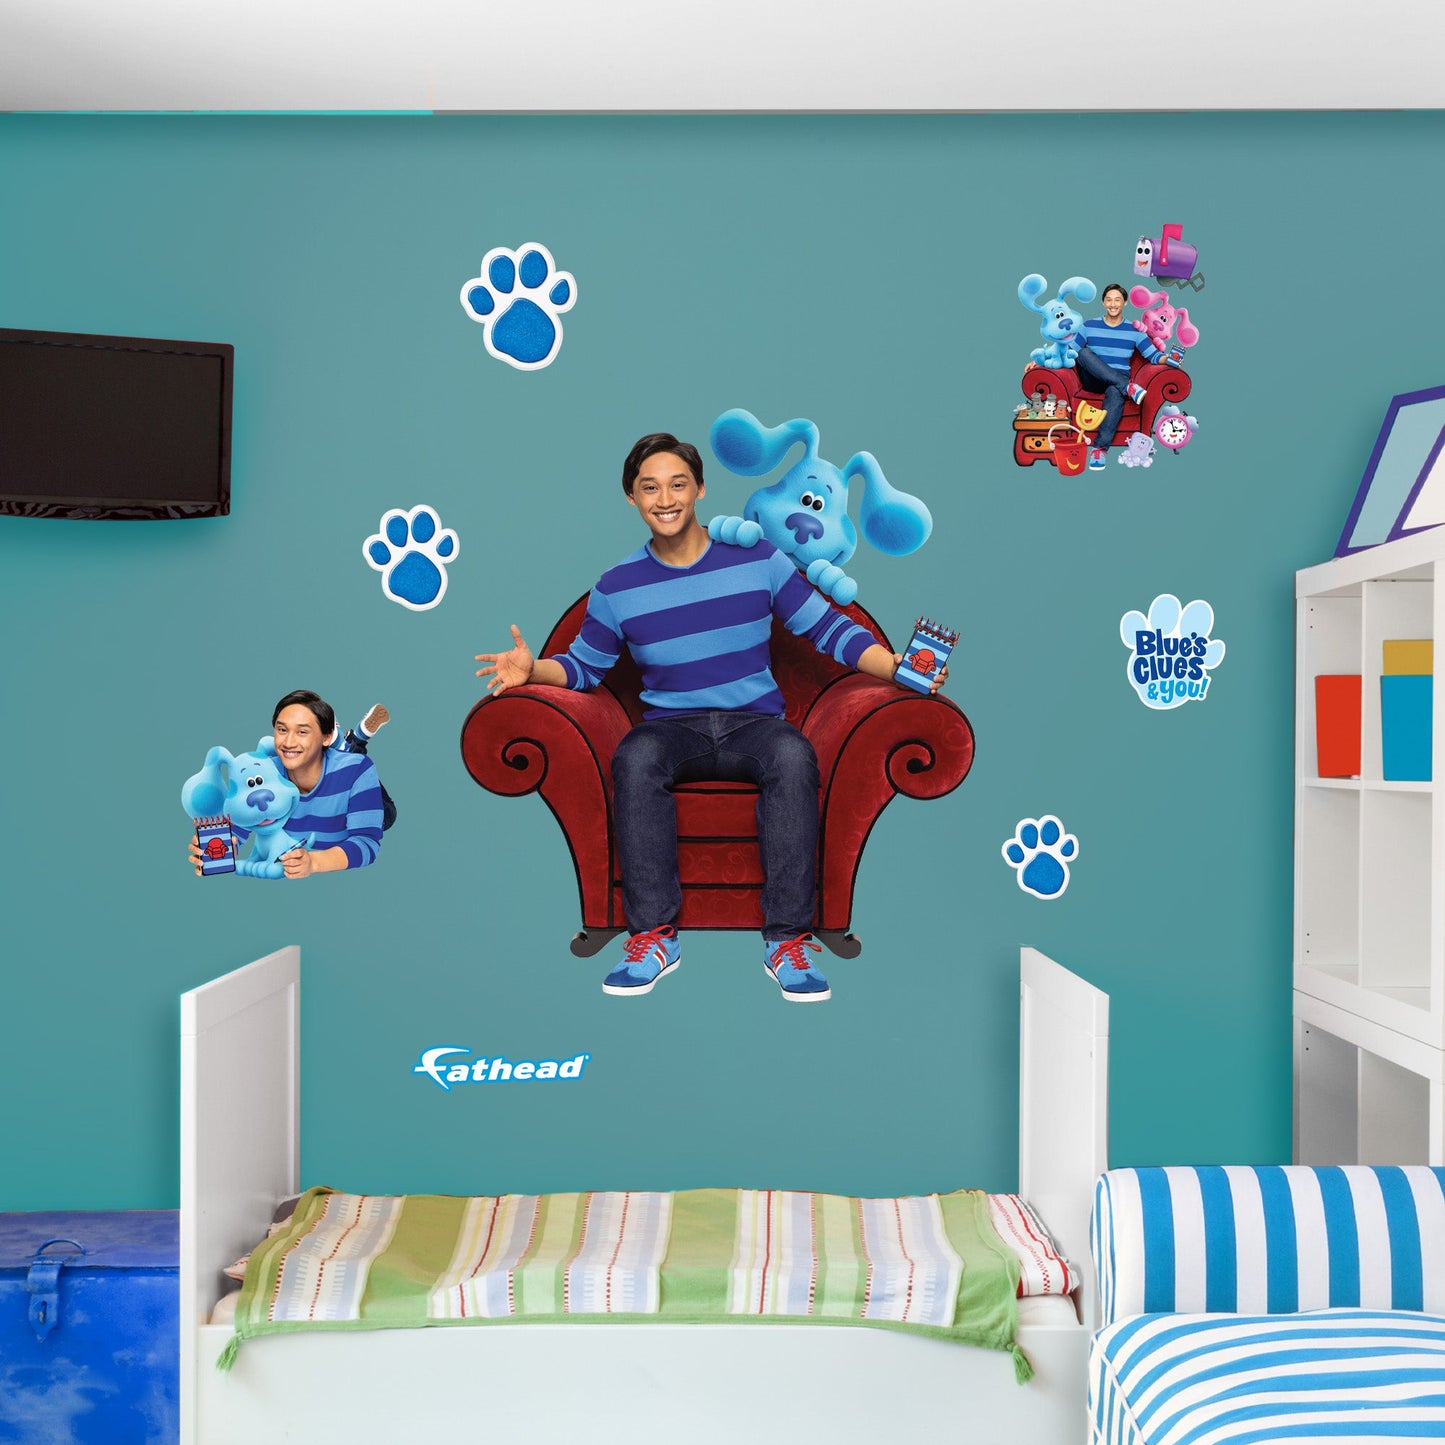 Blue's Clues: Josh RealBigs - Officially Licensed Nickelodeon Removable Adhesive Decal